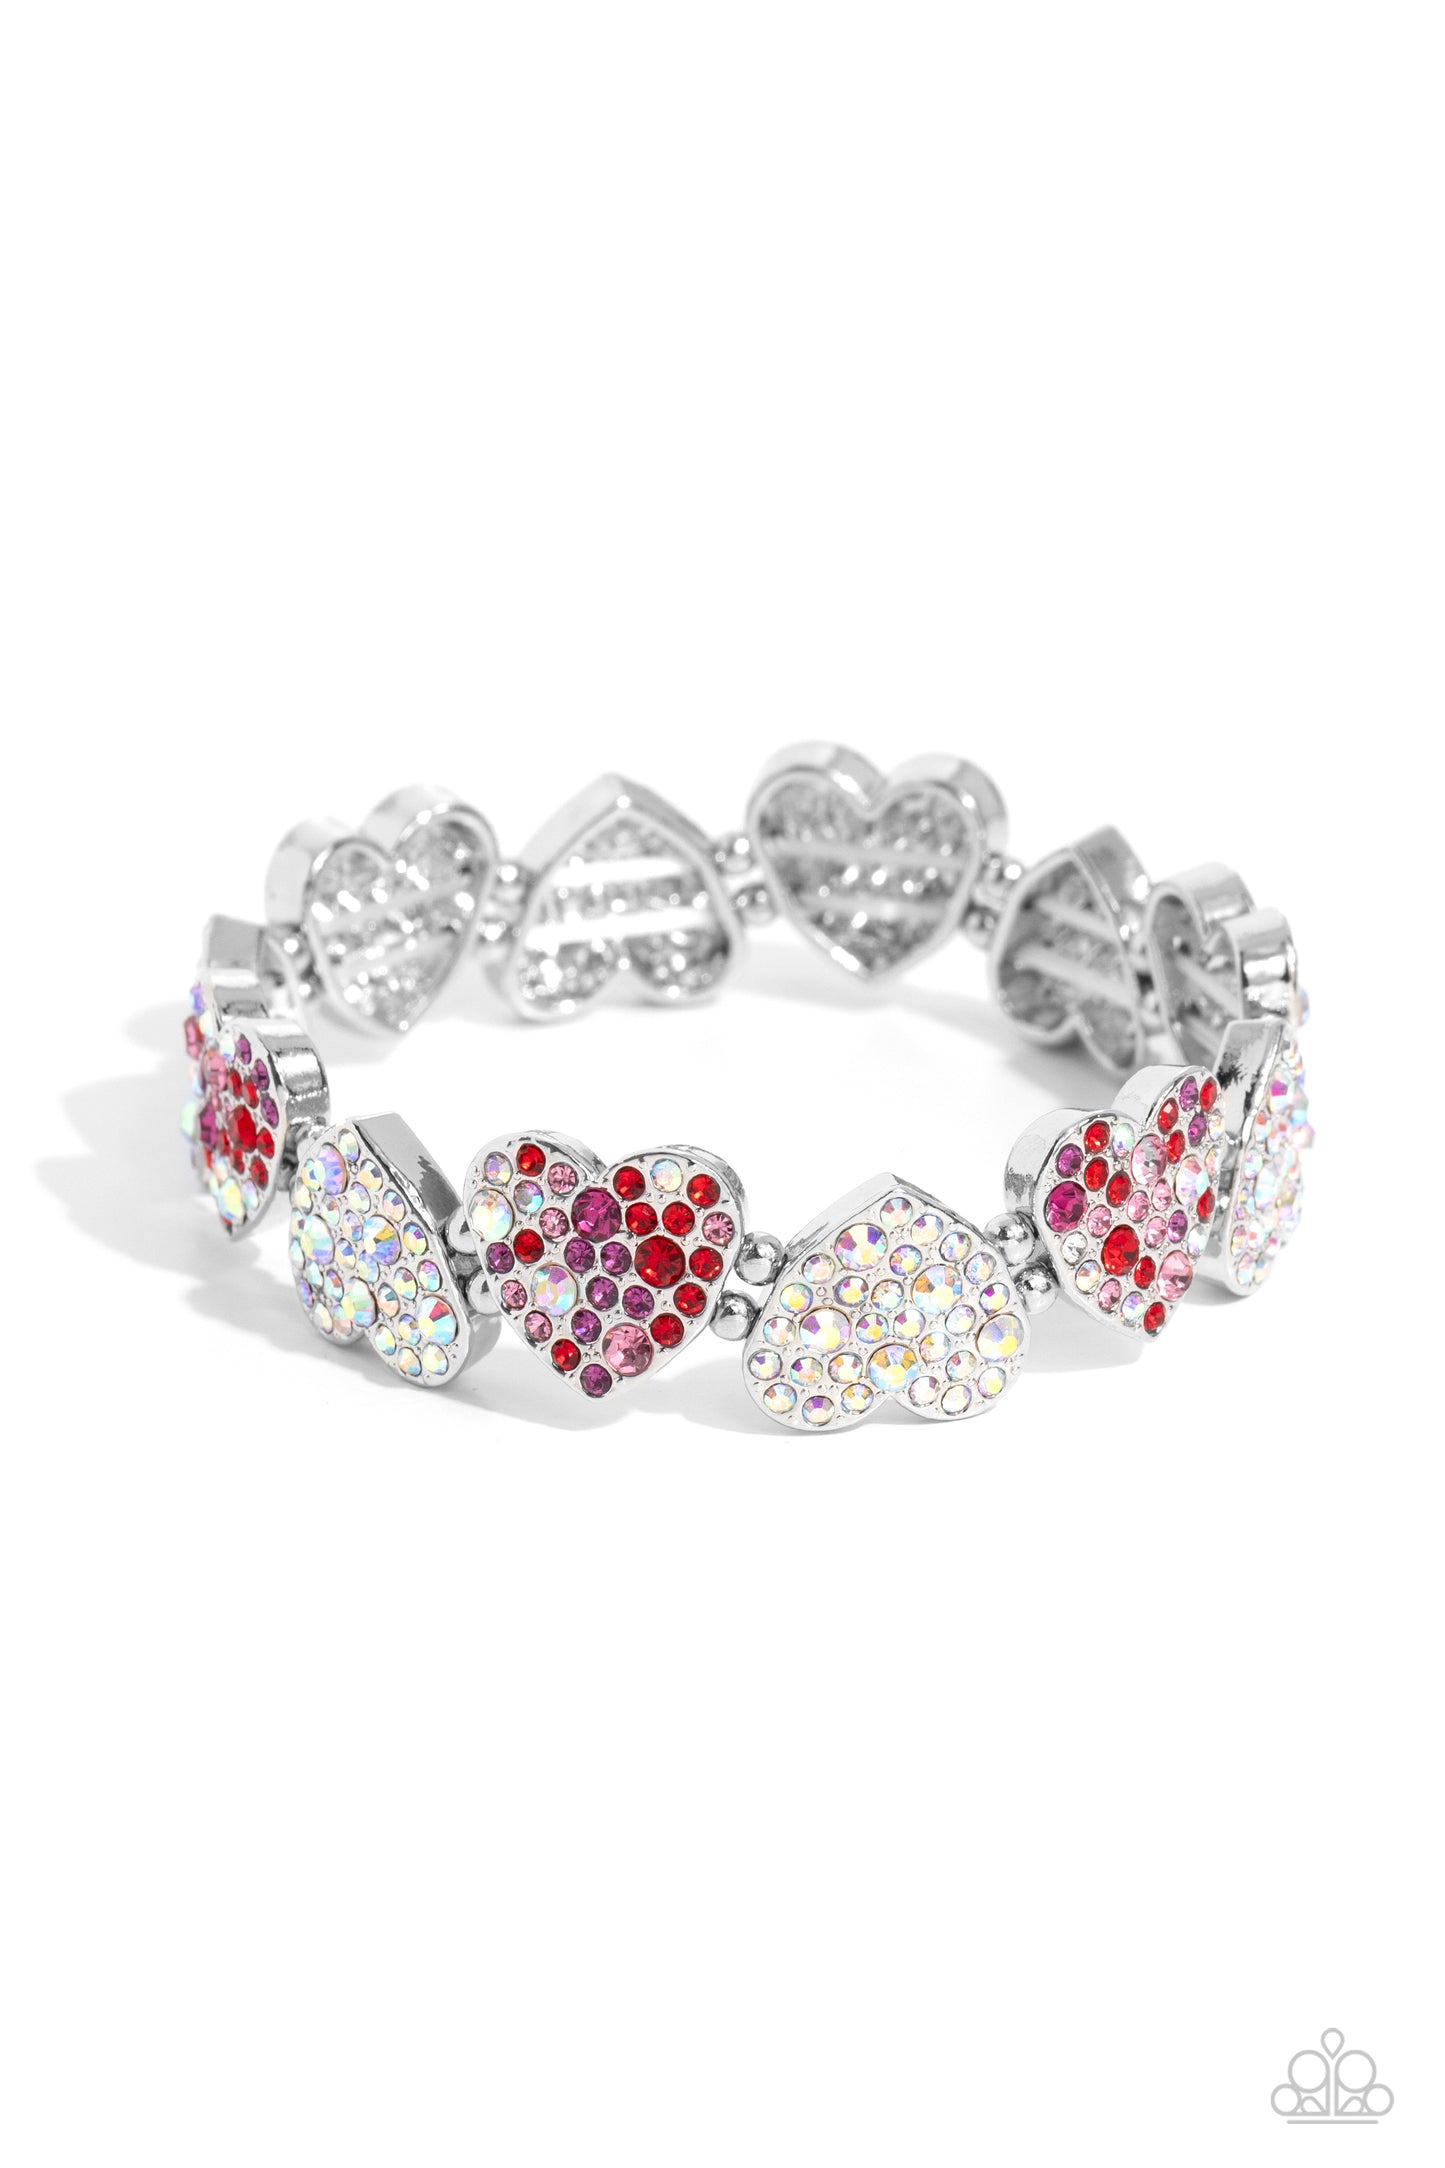 Headliner Heart Multi Rhinestone Stretch Bracelet - Paparazzi Accessories  Dotted with various sizes of dainty fuchsia, light rose, purple, red, and iridescent rhinestones, sleek silver hearts alternating in direction link together around the wrist along a stretchy band for a flirtatious finish. Due to its prismatic palette, color may vary.  Sold as one individual bracelet.  SKU: P9RE-MTXX-149XX